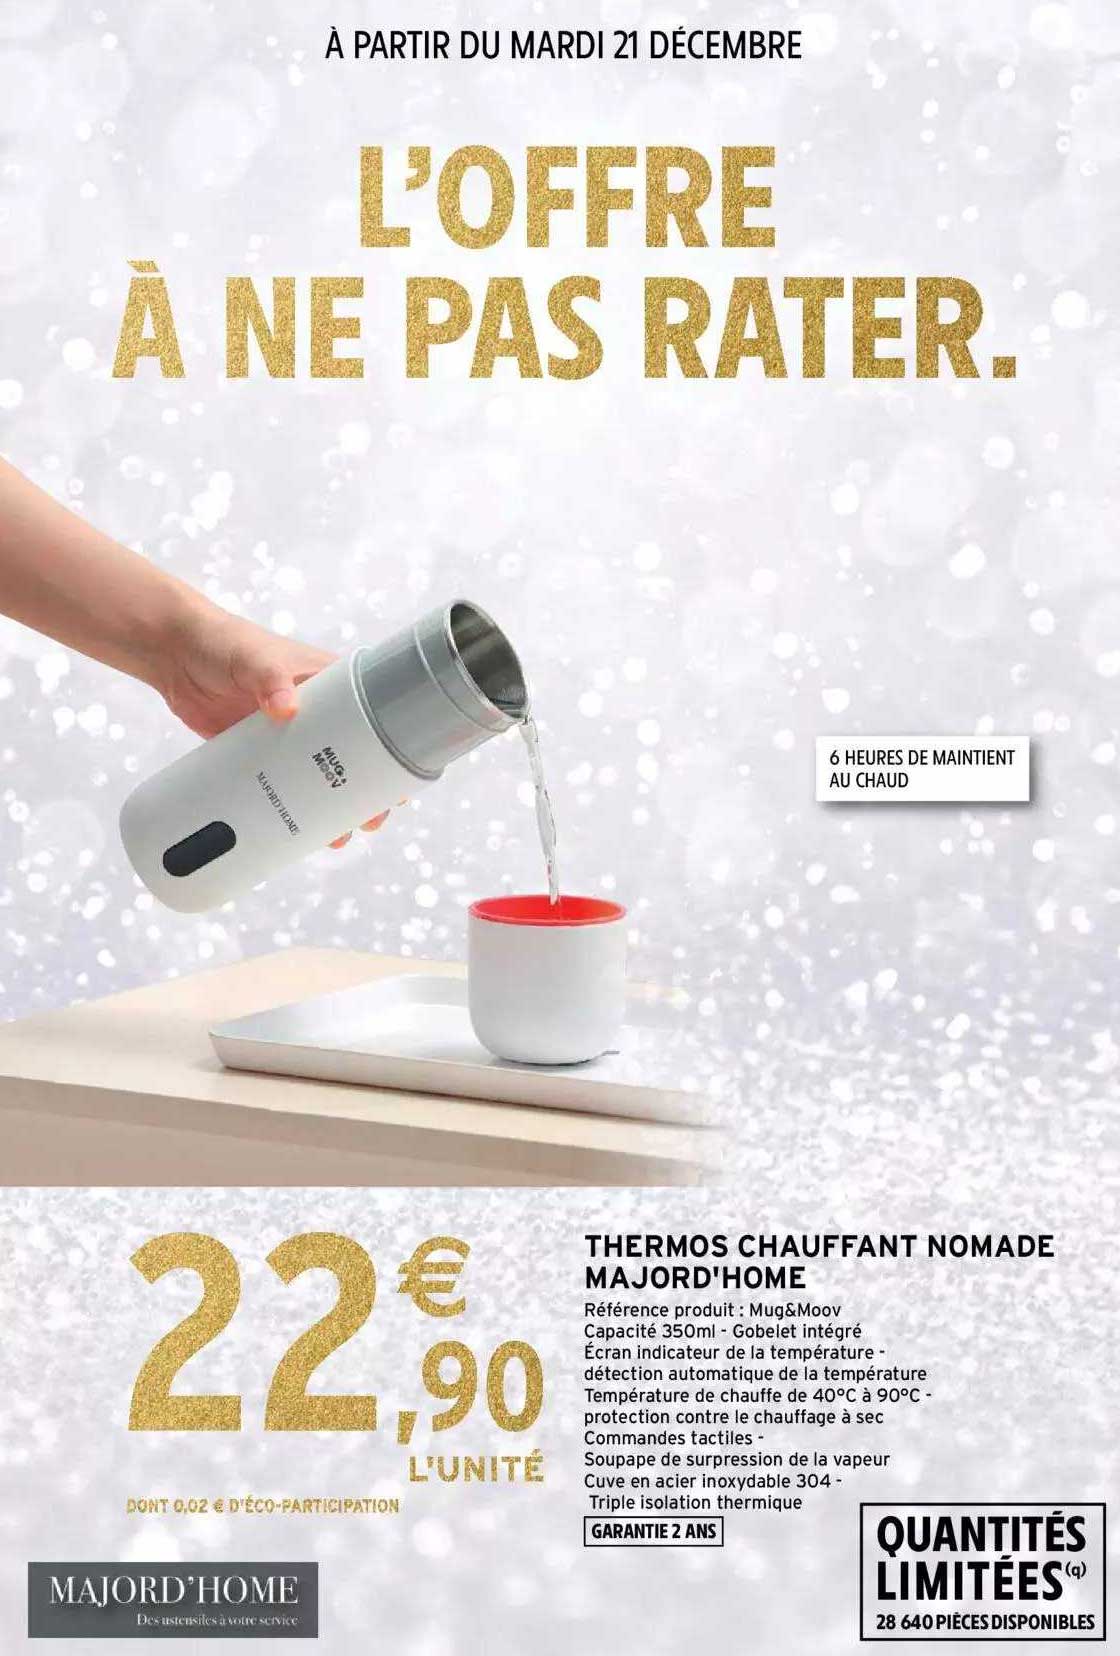 Intermarché Hyper Thermos Chauffant Nomade Majord'home